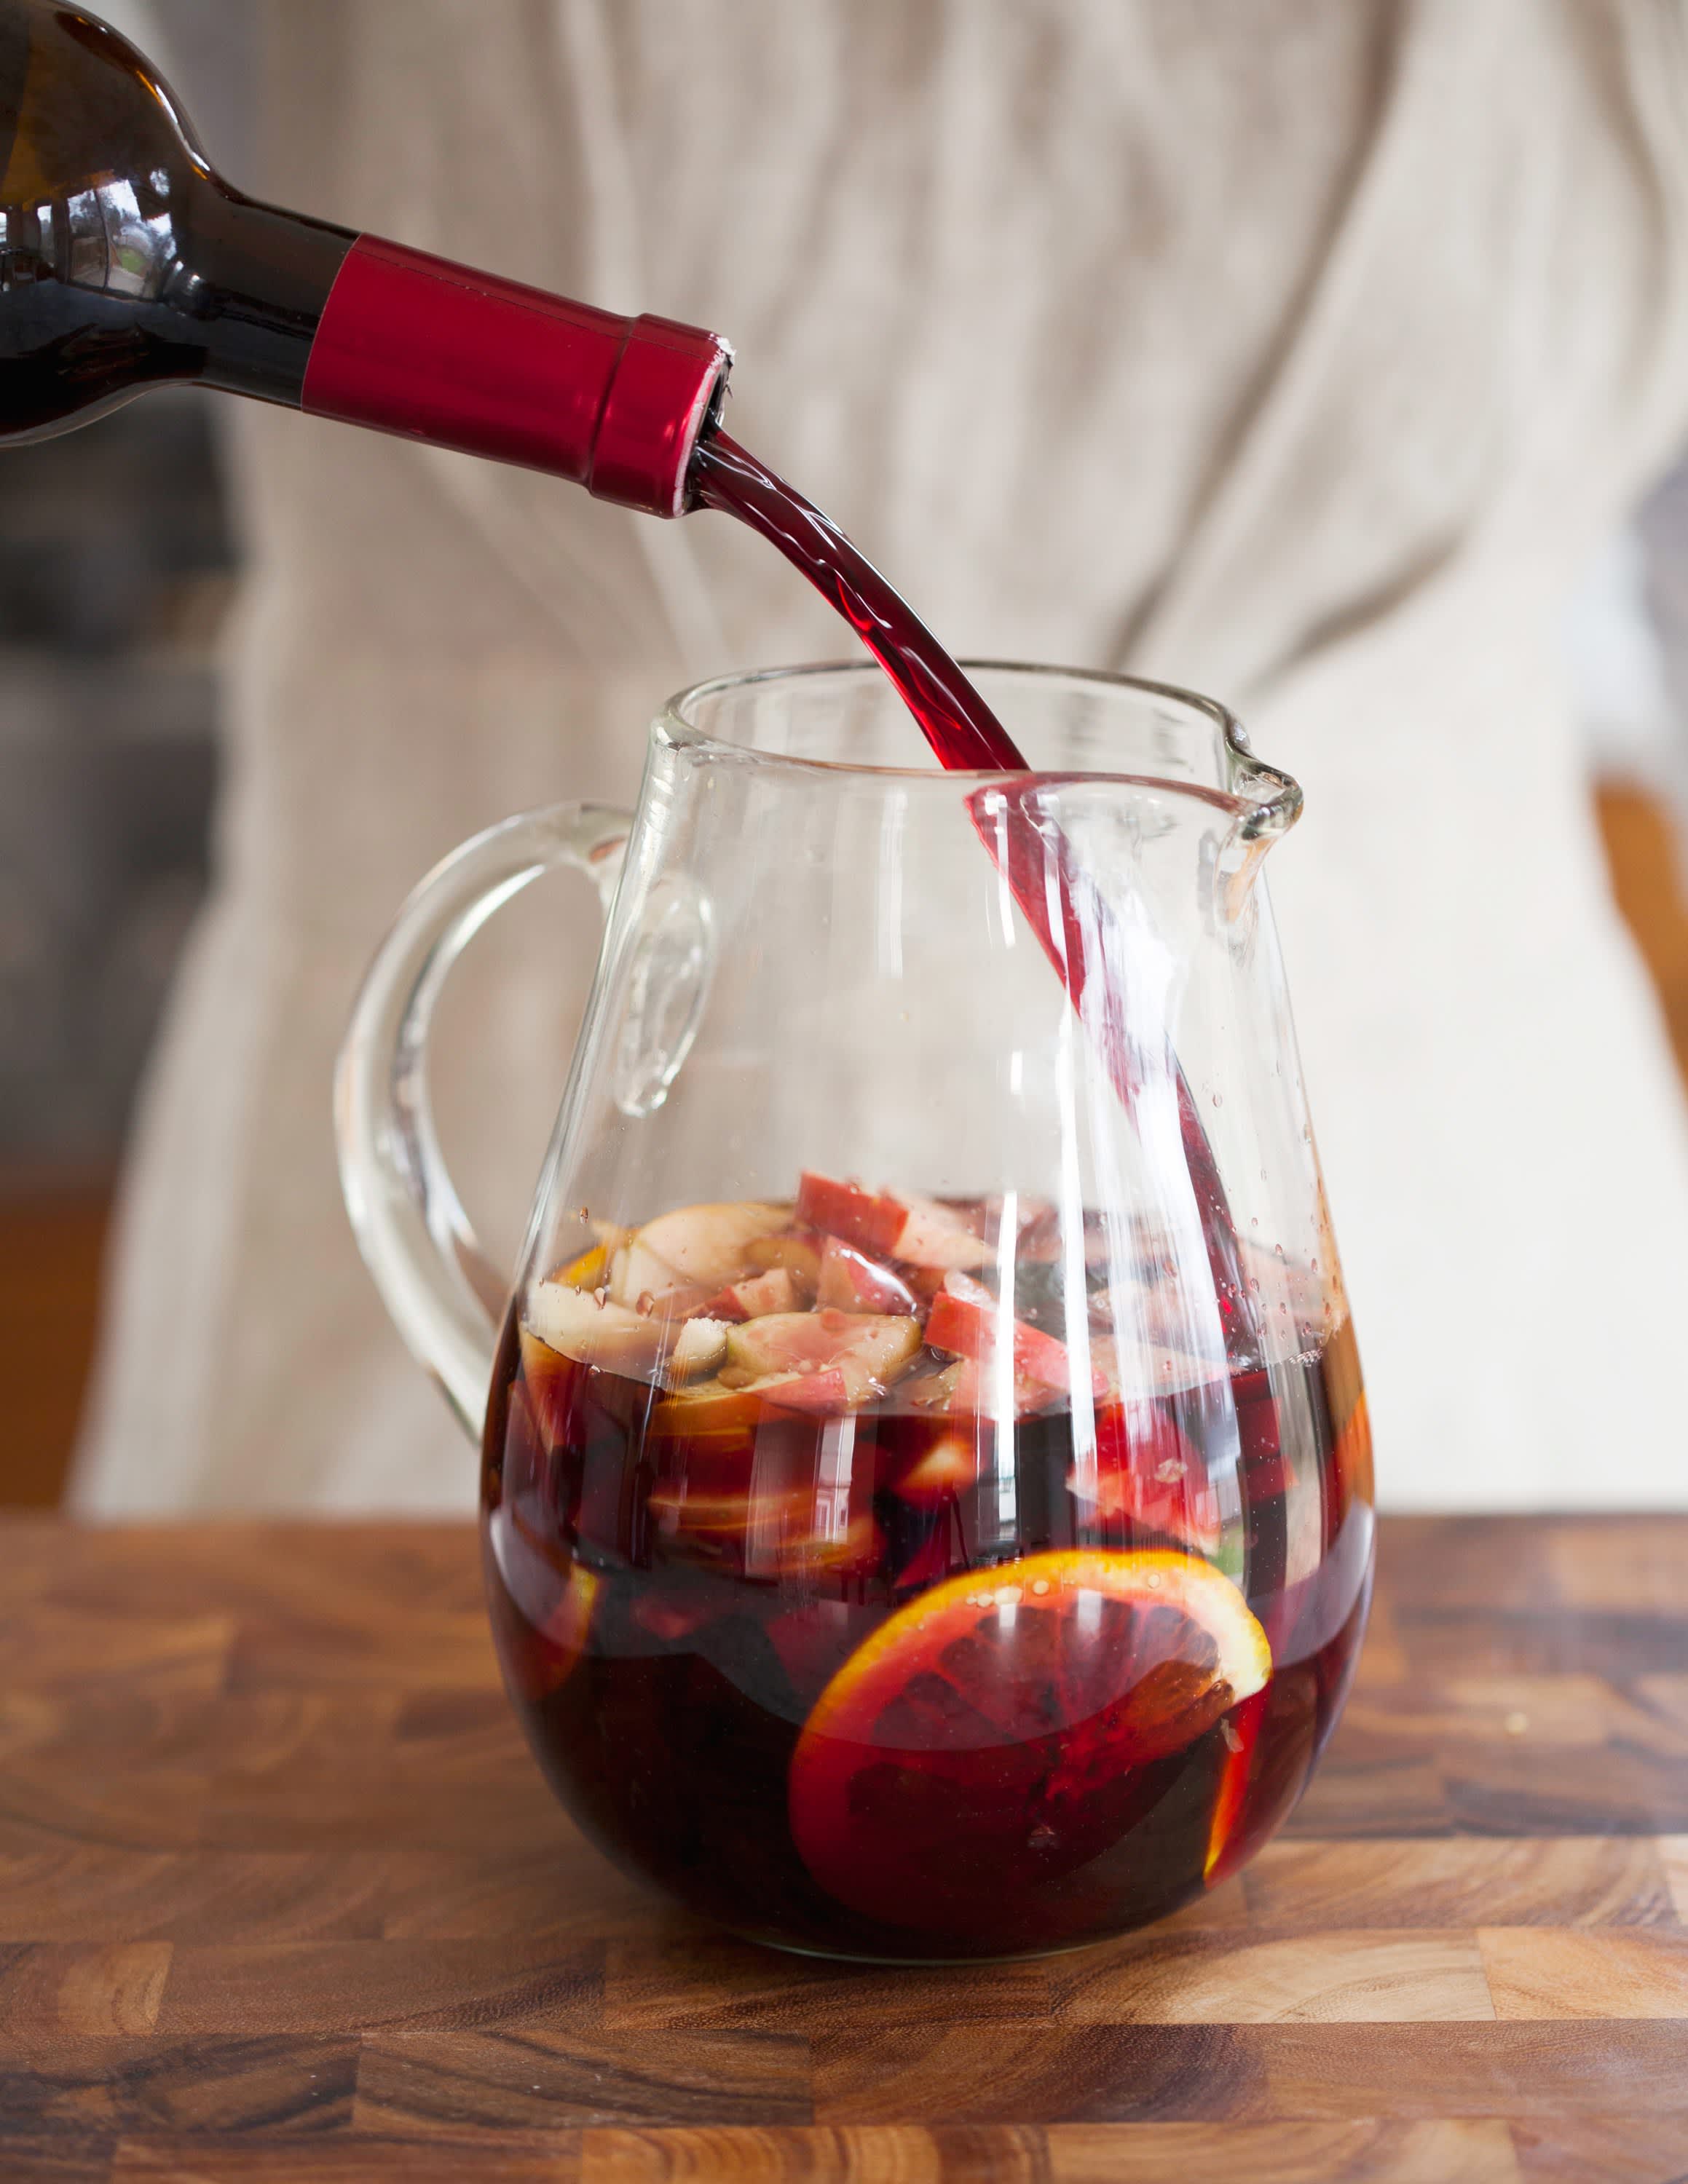 How To Make Red Wine Sangria | Kitchn